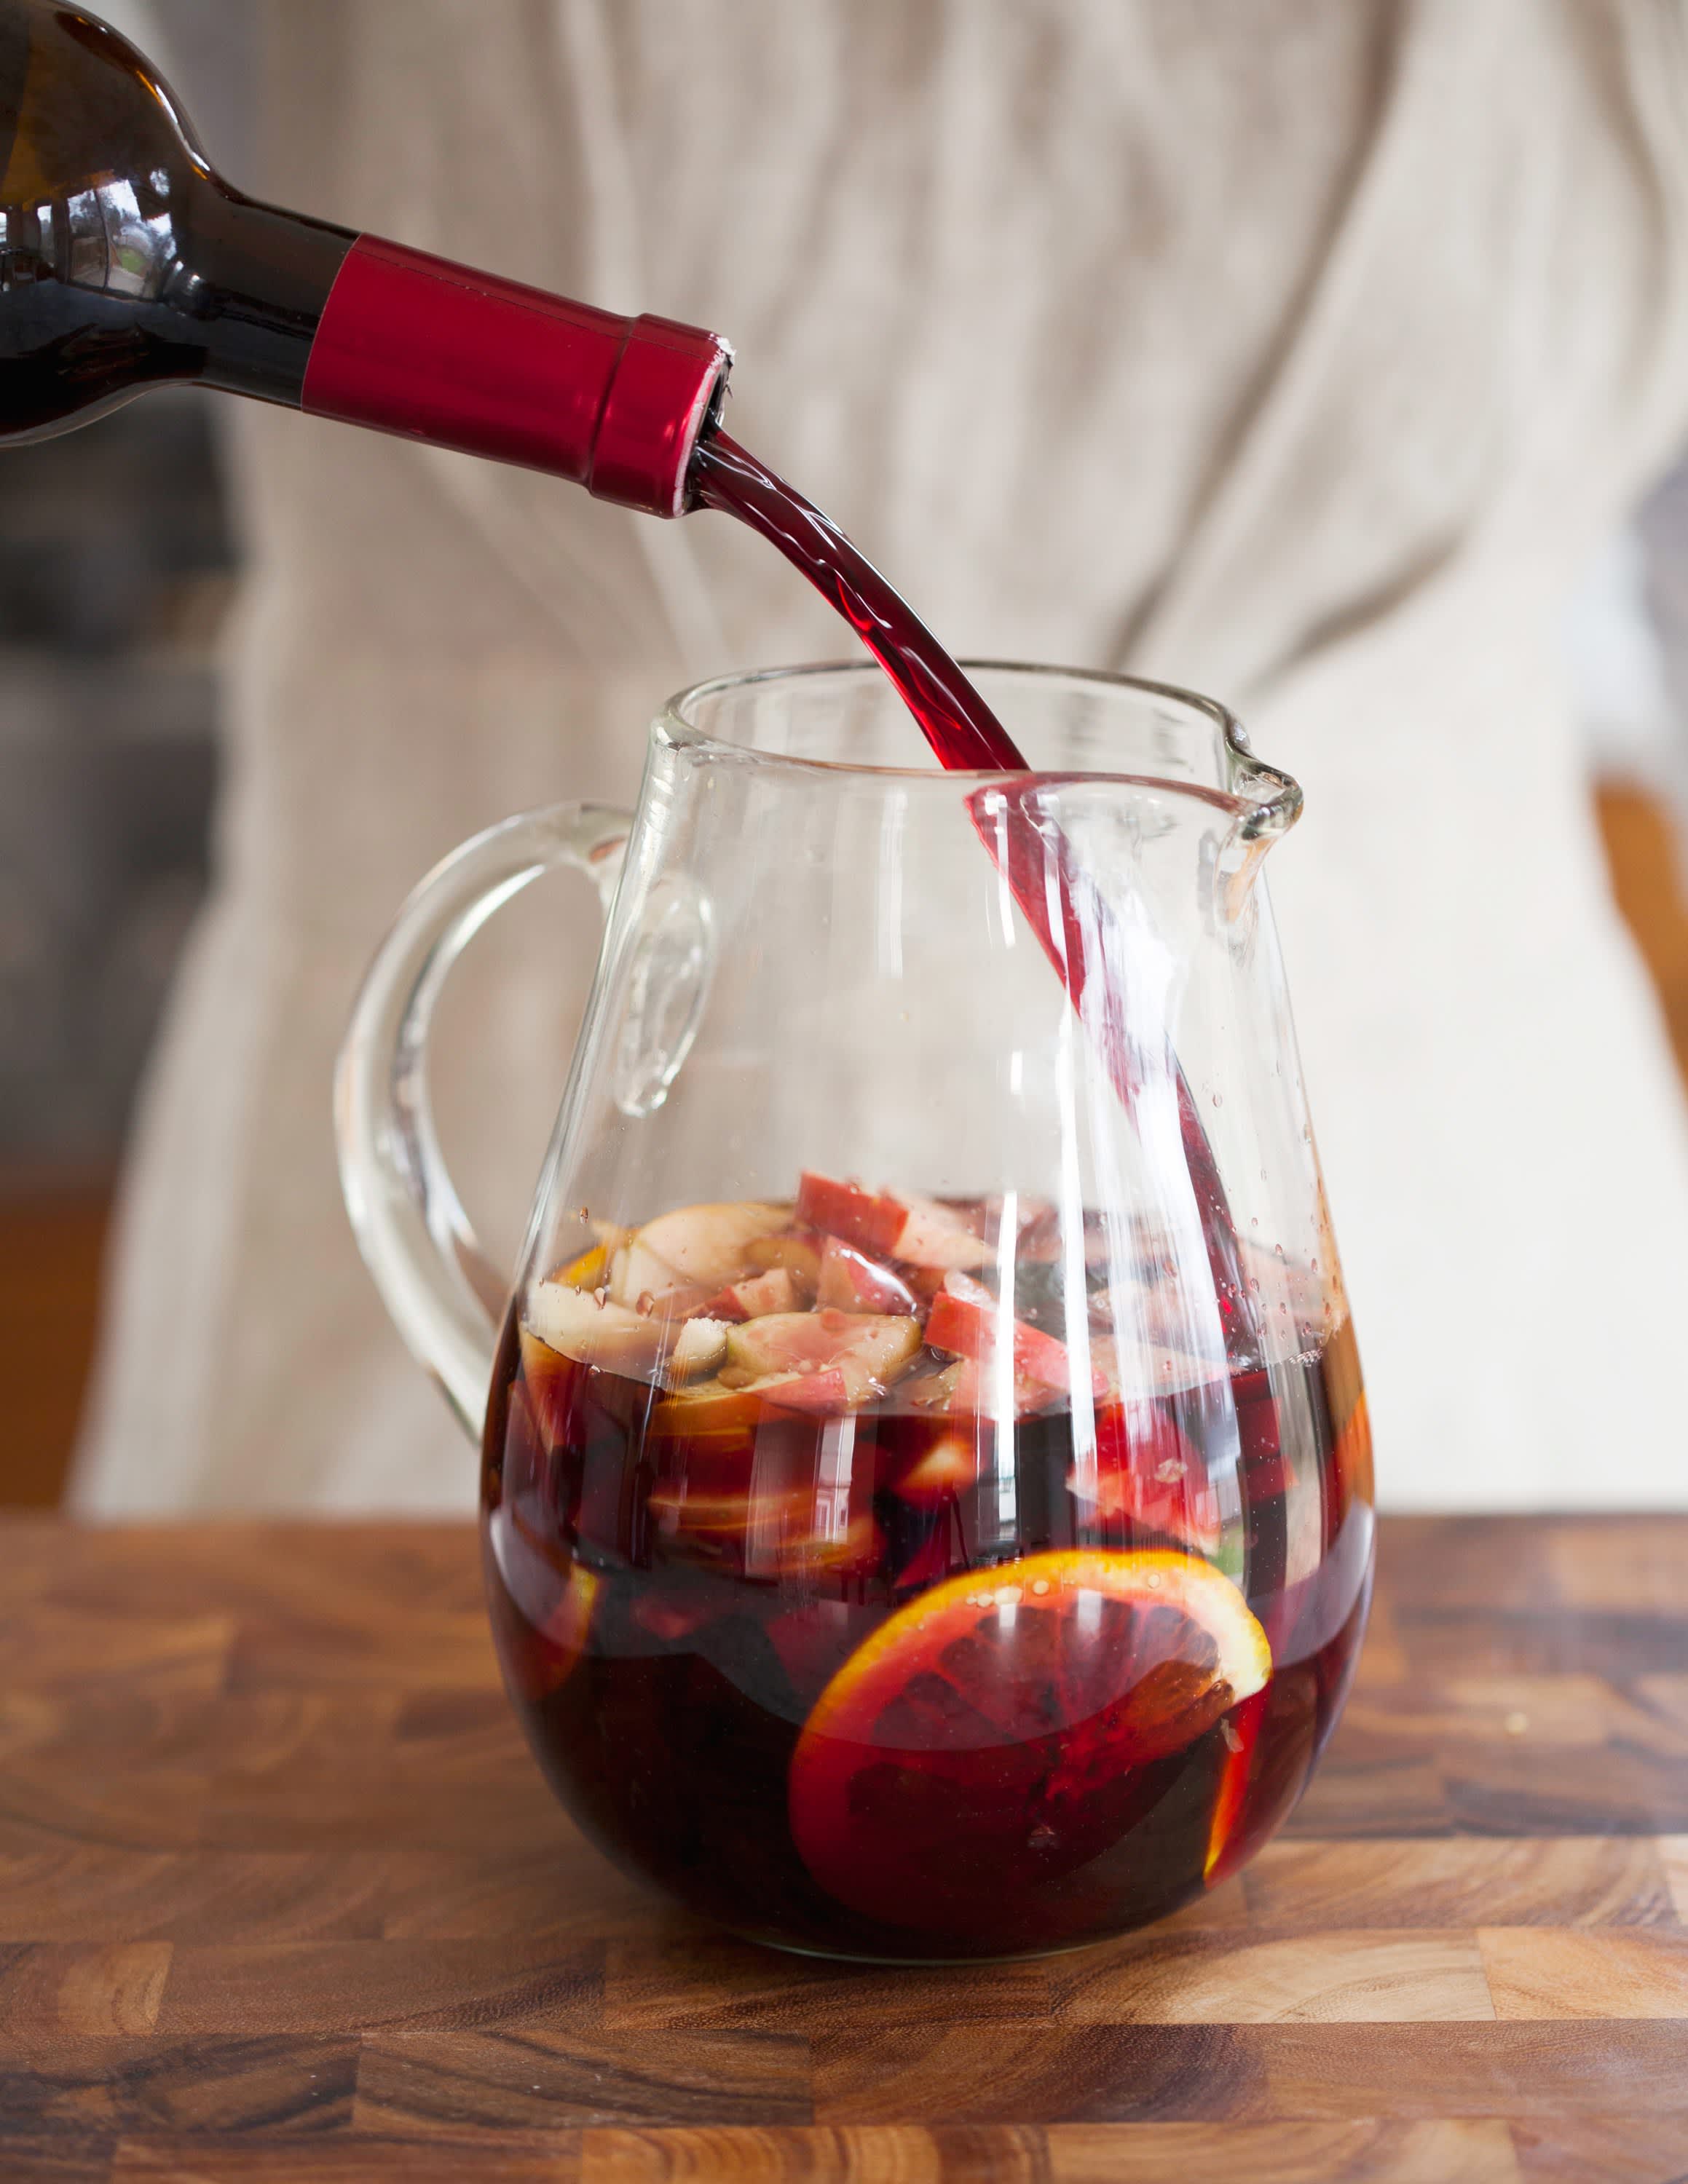 How To Make Red Wine Sangria | Kitchn